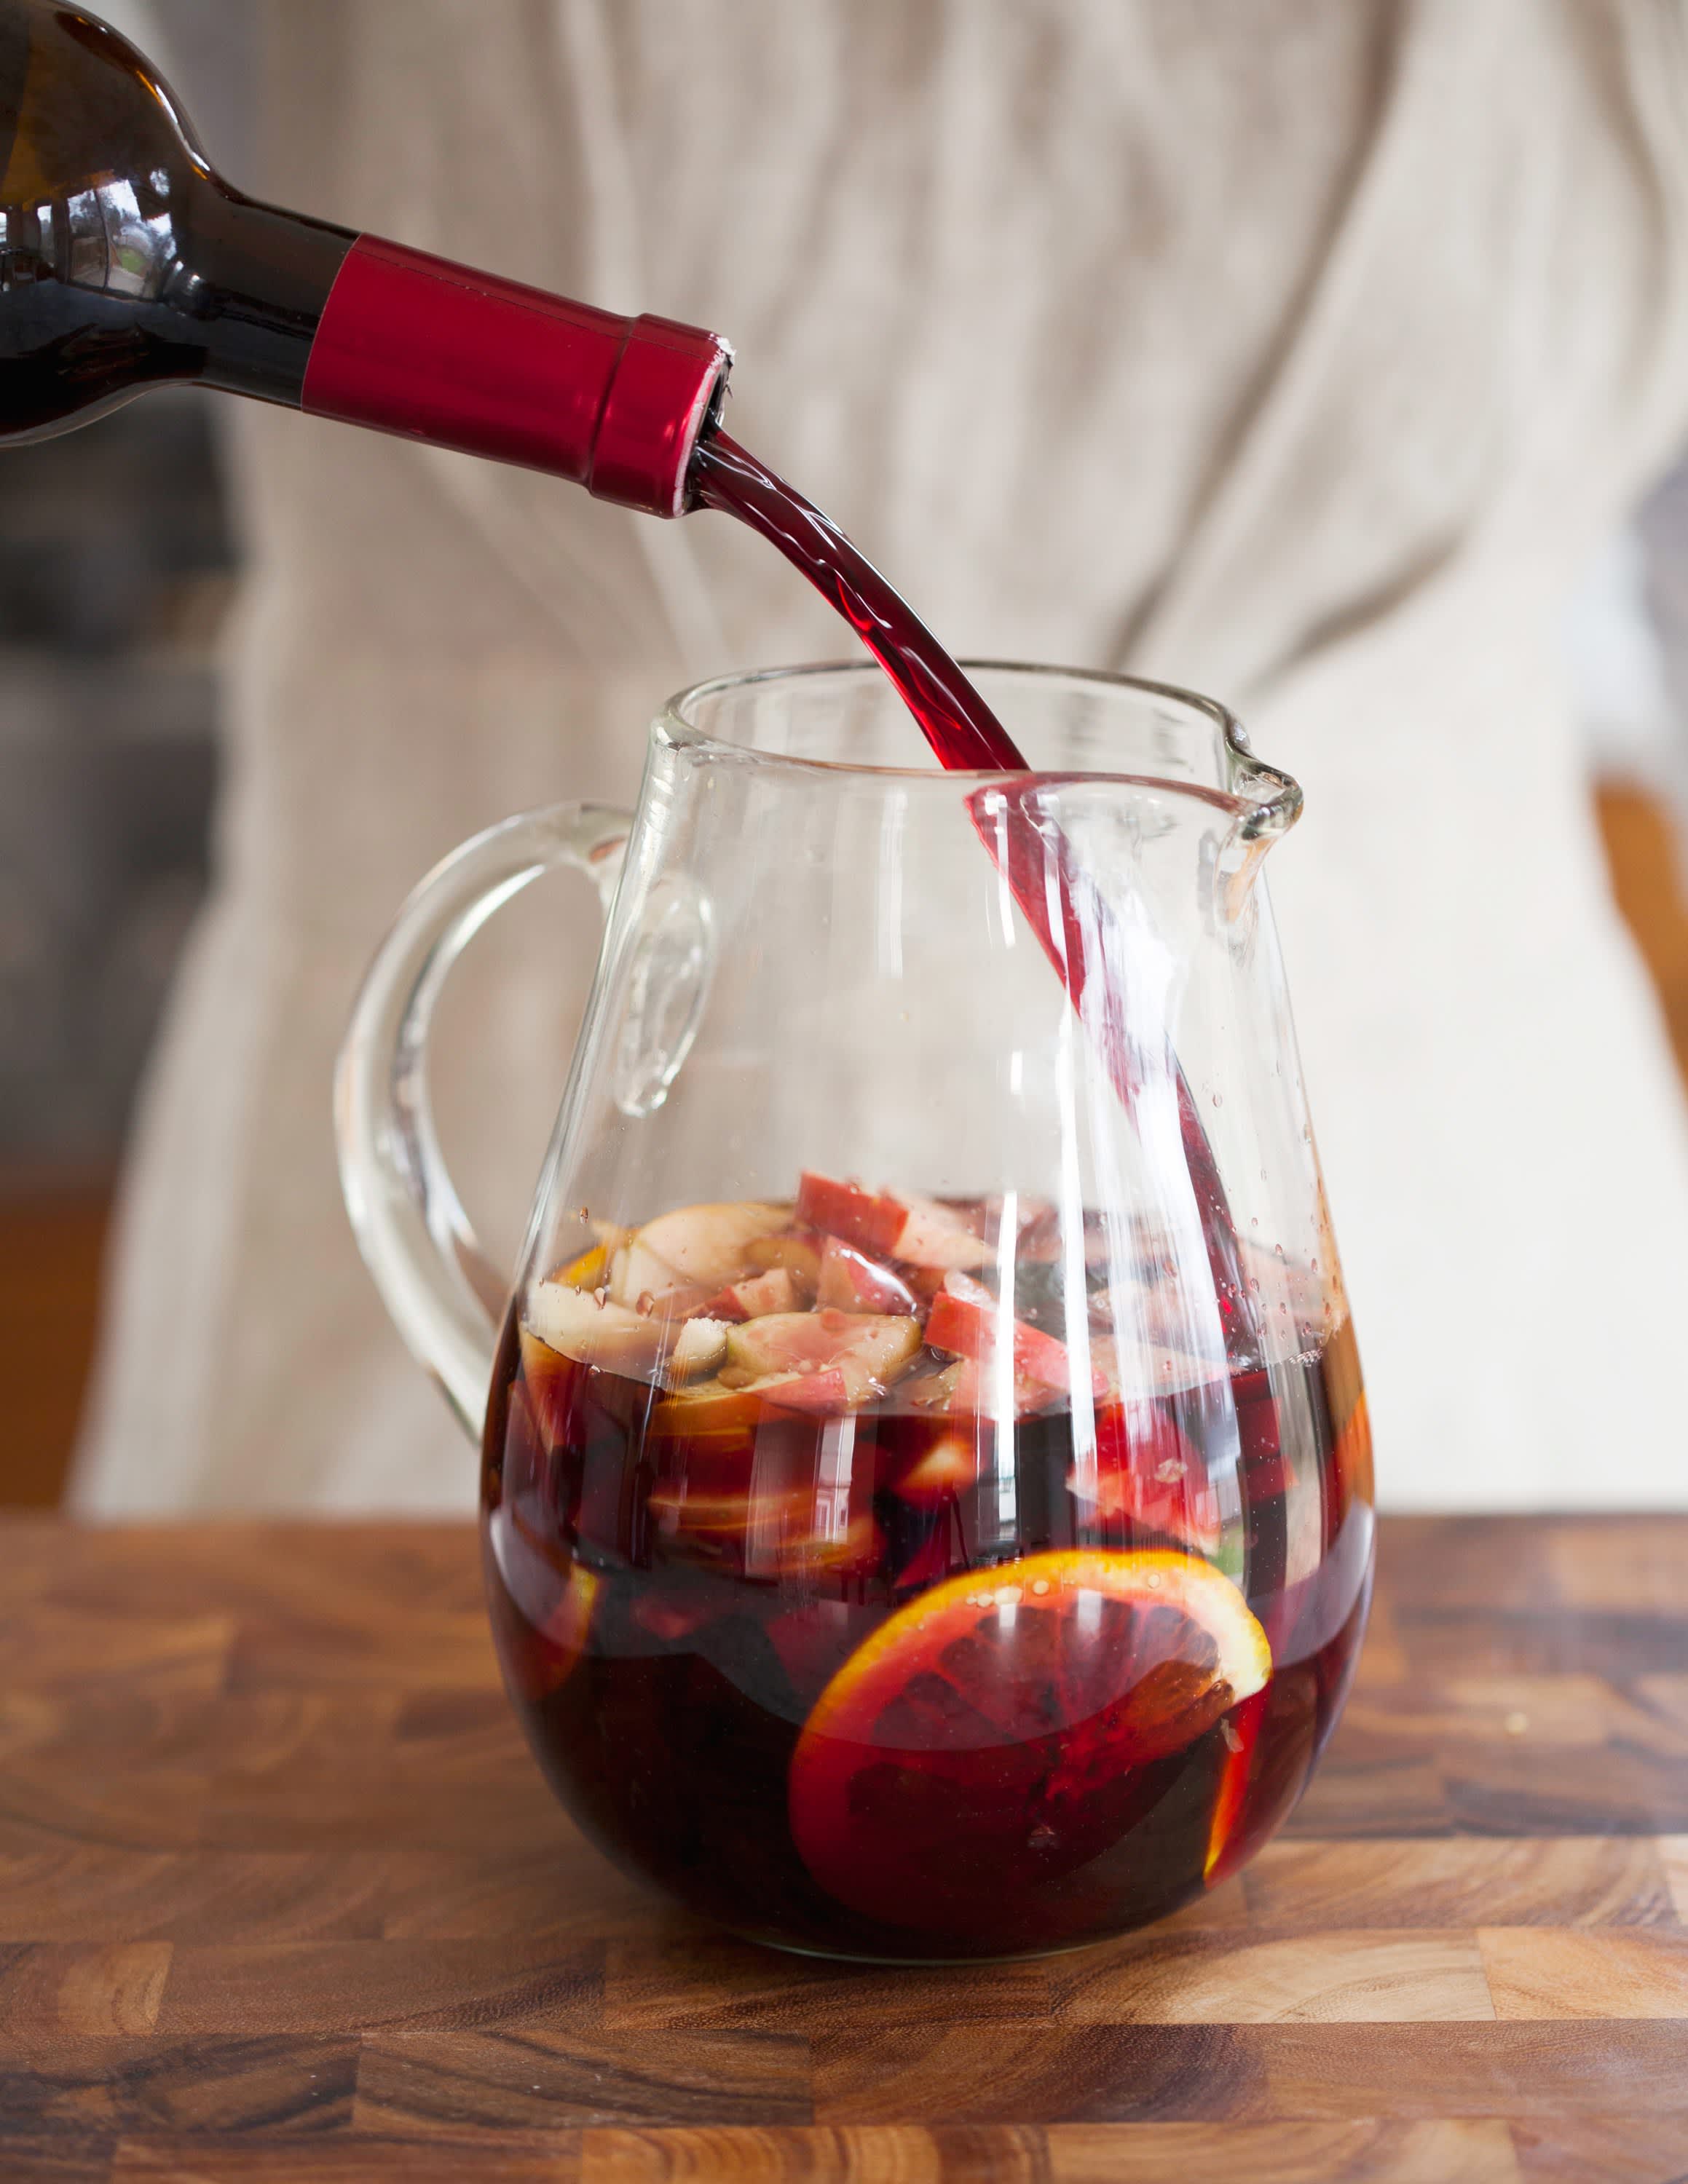 How To Make Red Wine Sangria | Kitchn